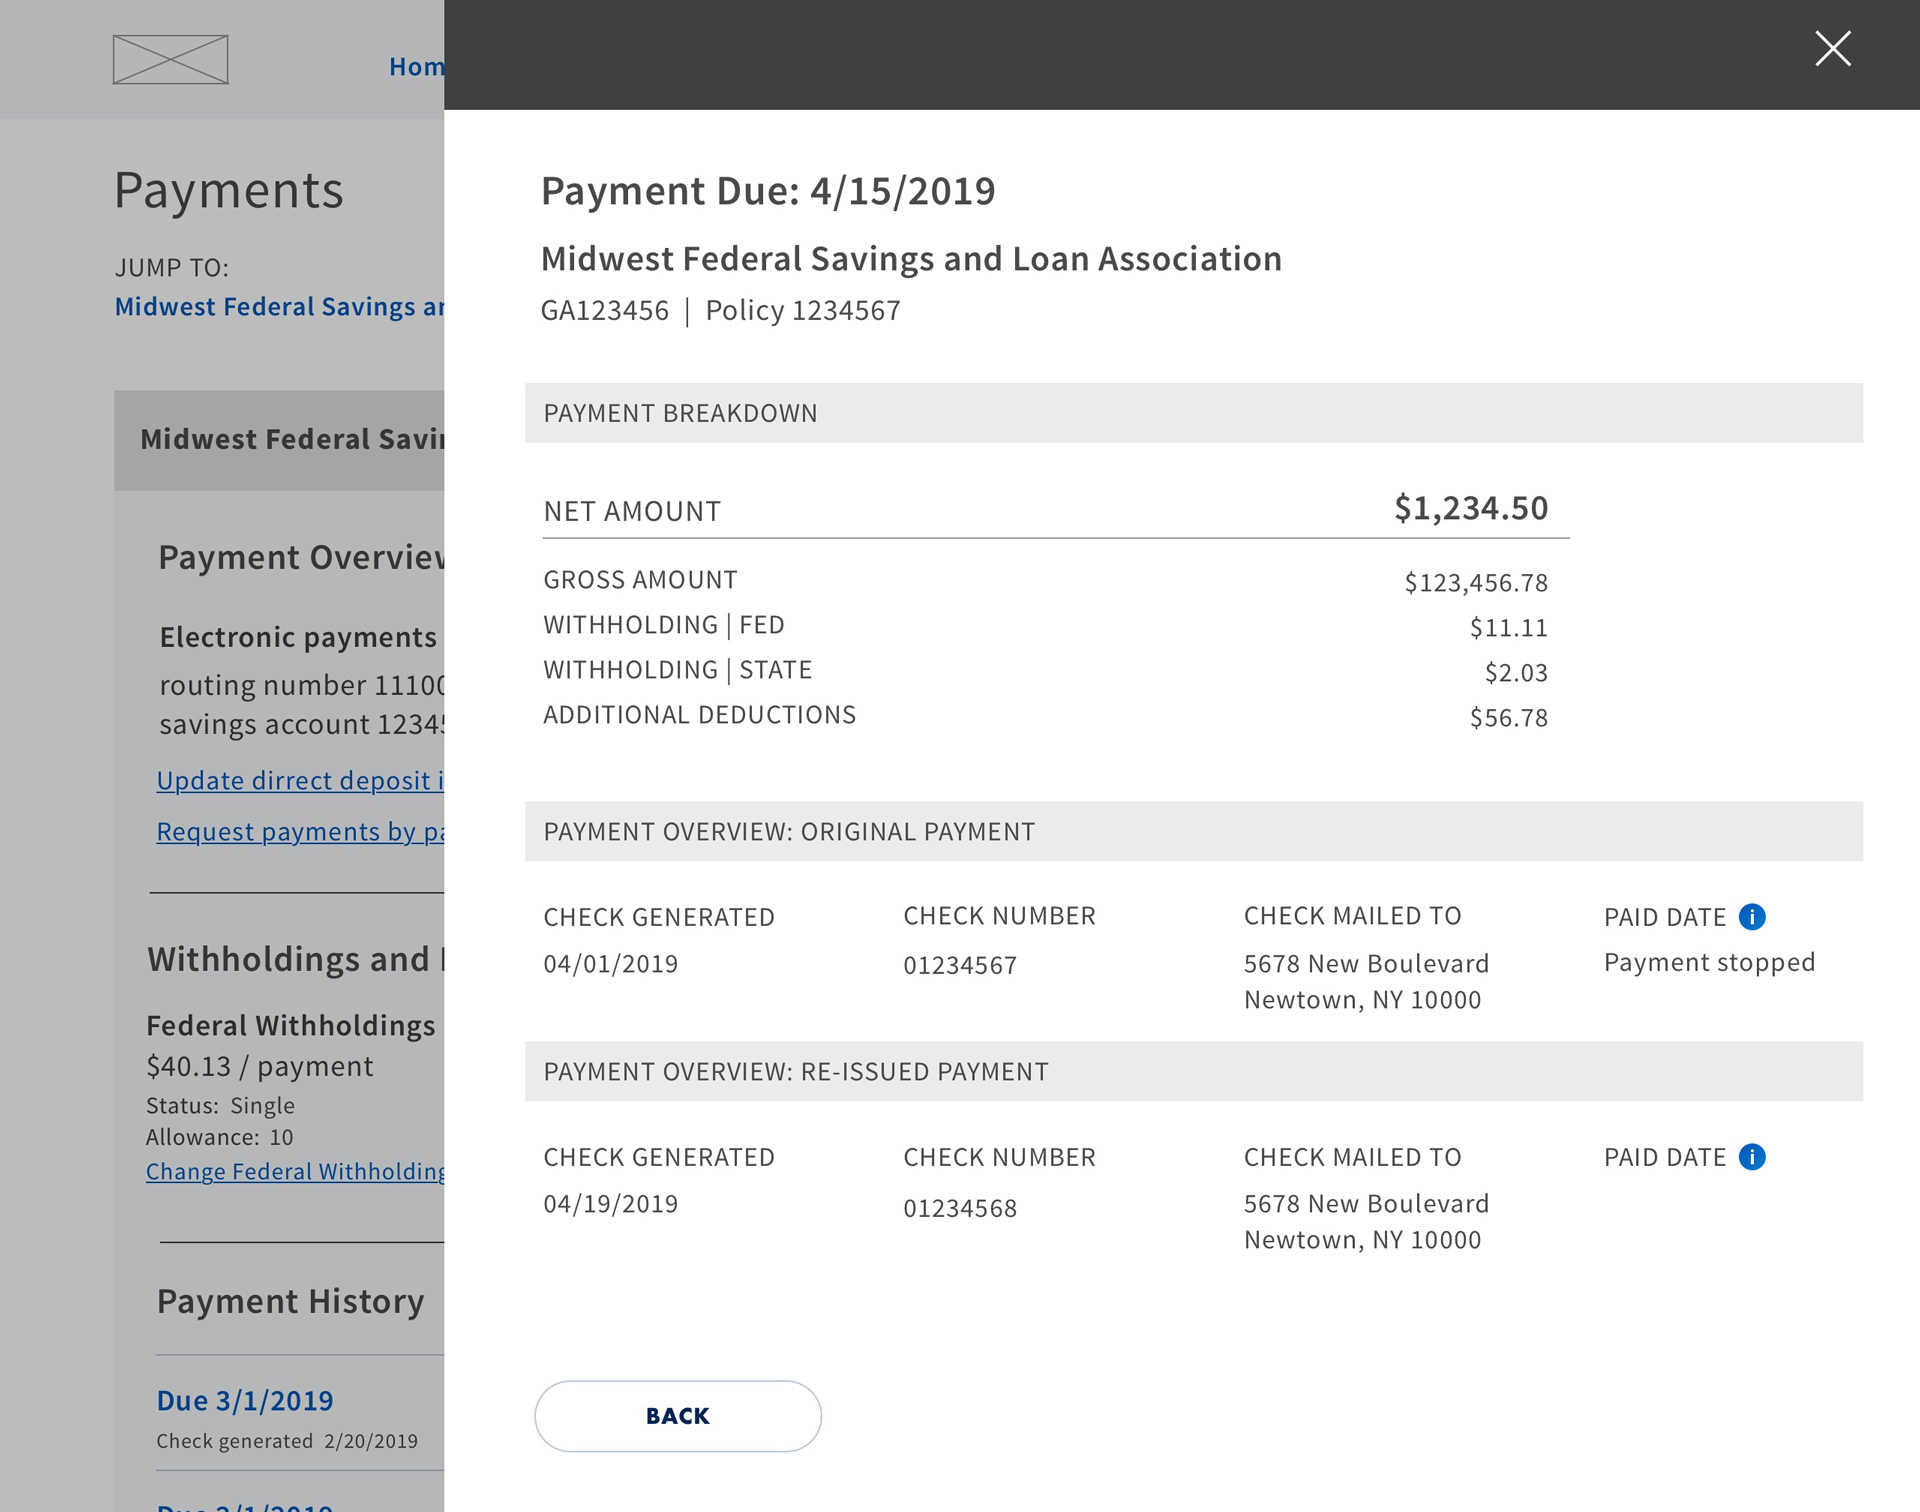 Pensions: Payment Details Wireframe